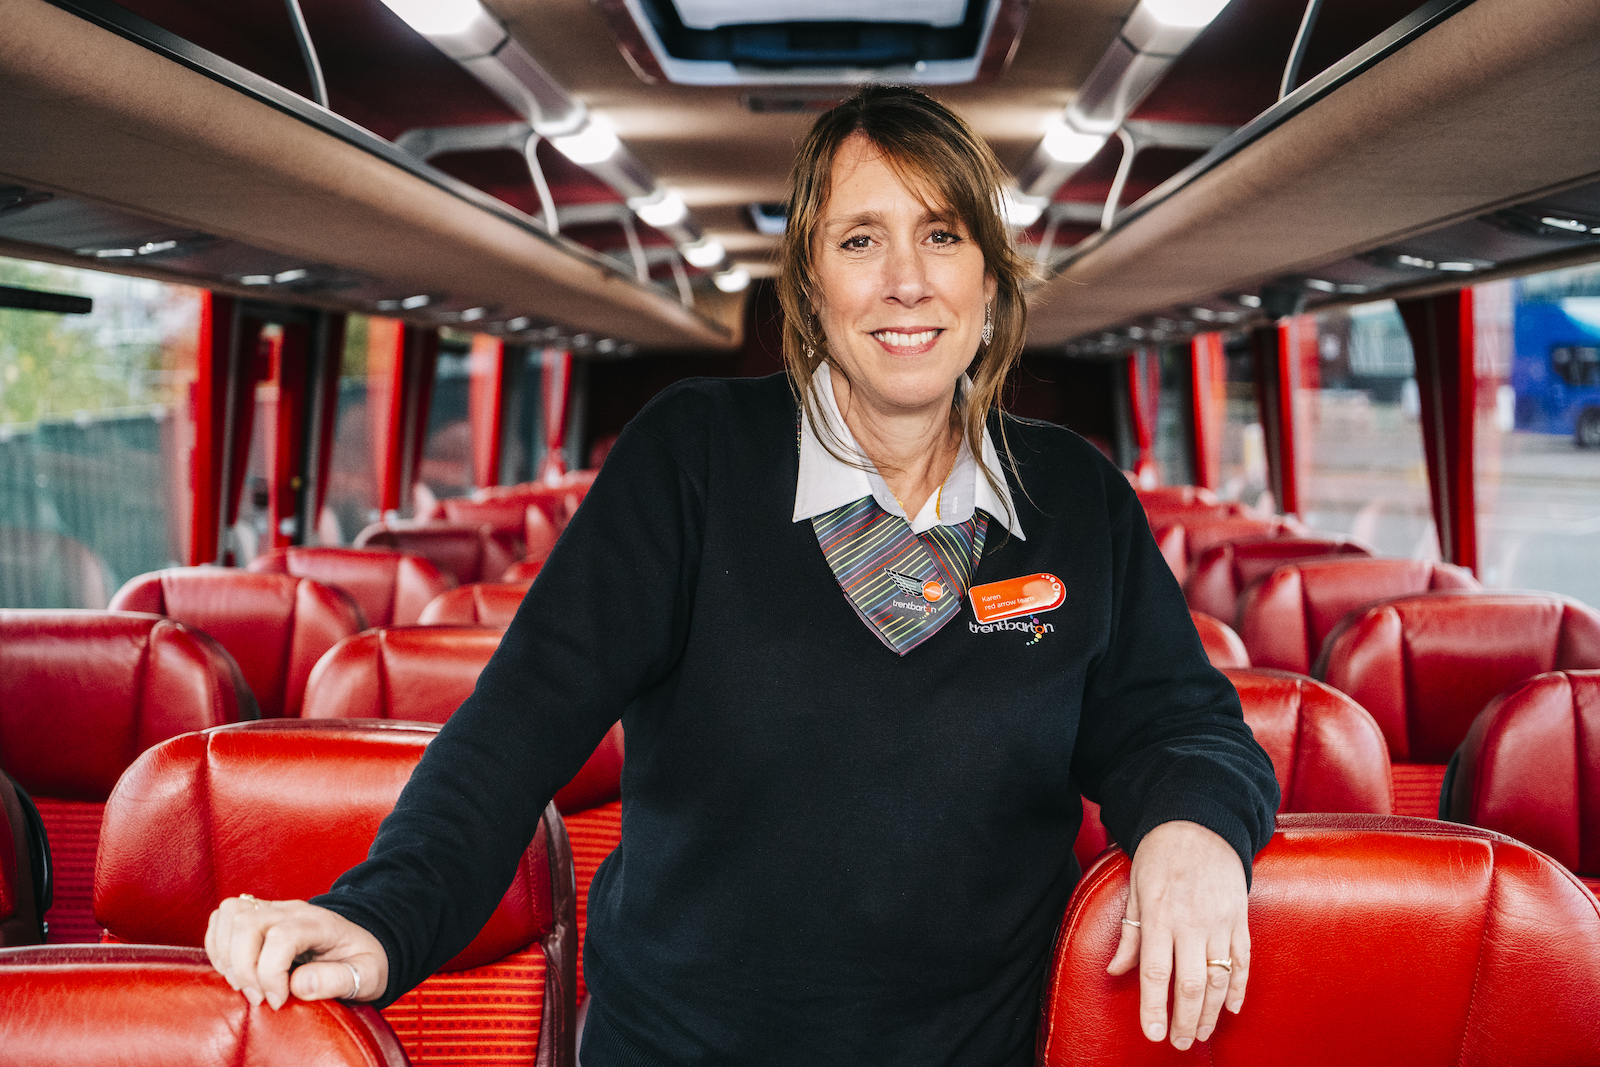 Britain’s best bus driver calls on more women to hit the road